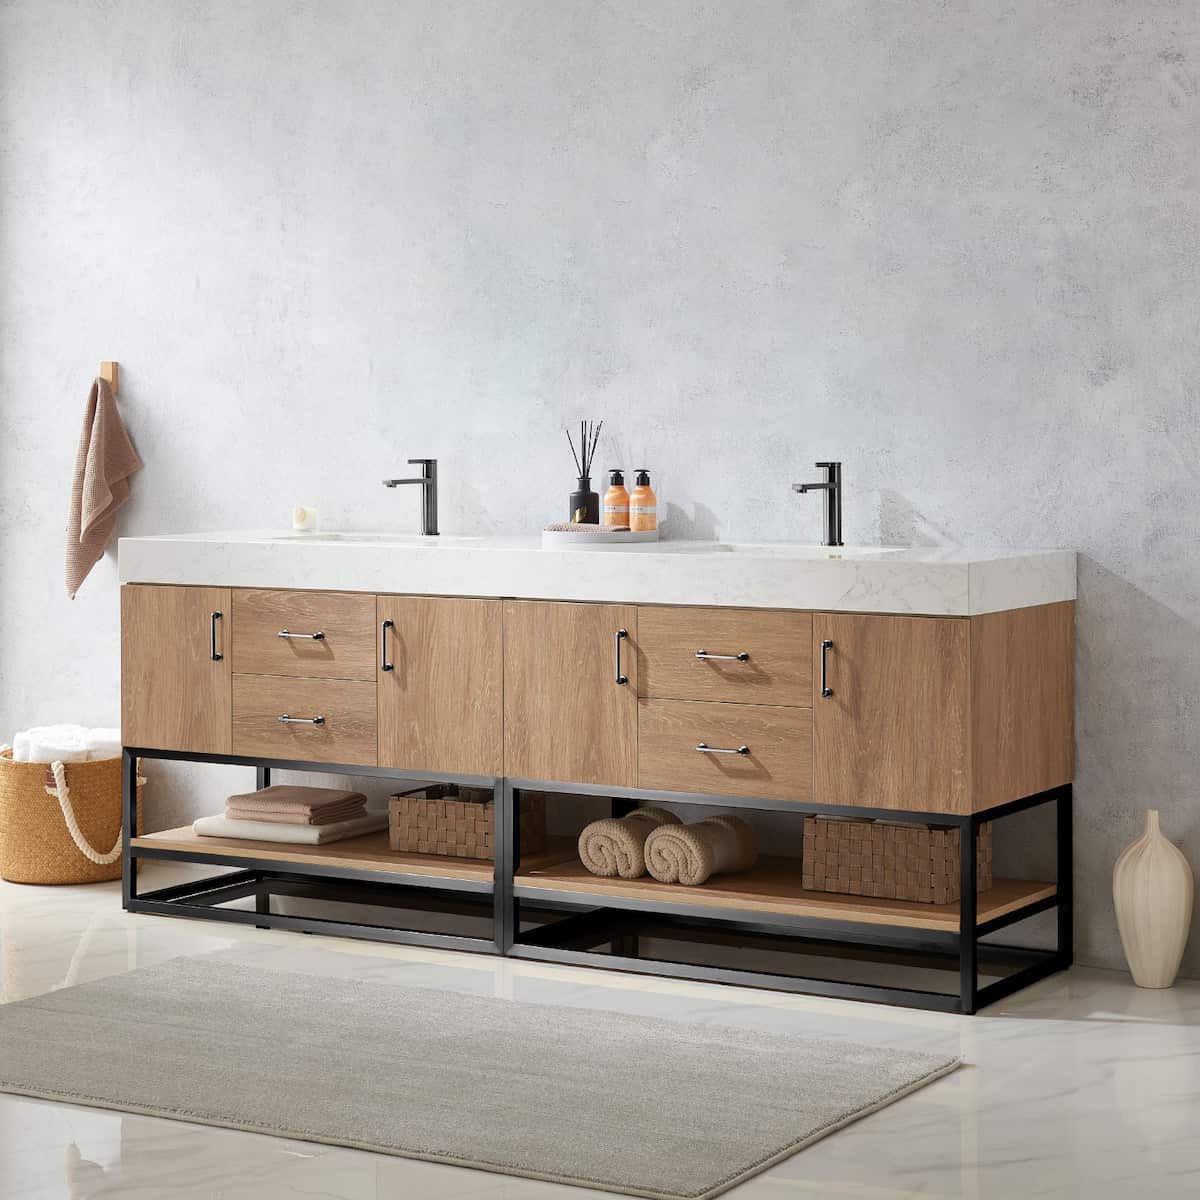 Vinnova Alistair 84 Inch Freestanding Double Vanity in North American Oak and Matte Black Frame with White Grain Stone Countertop Without Mirrors Side 789084B-NO-GW-NM